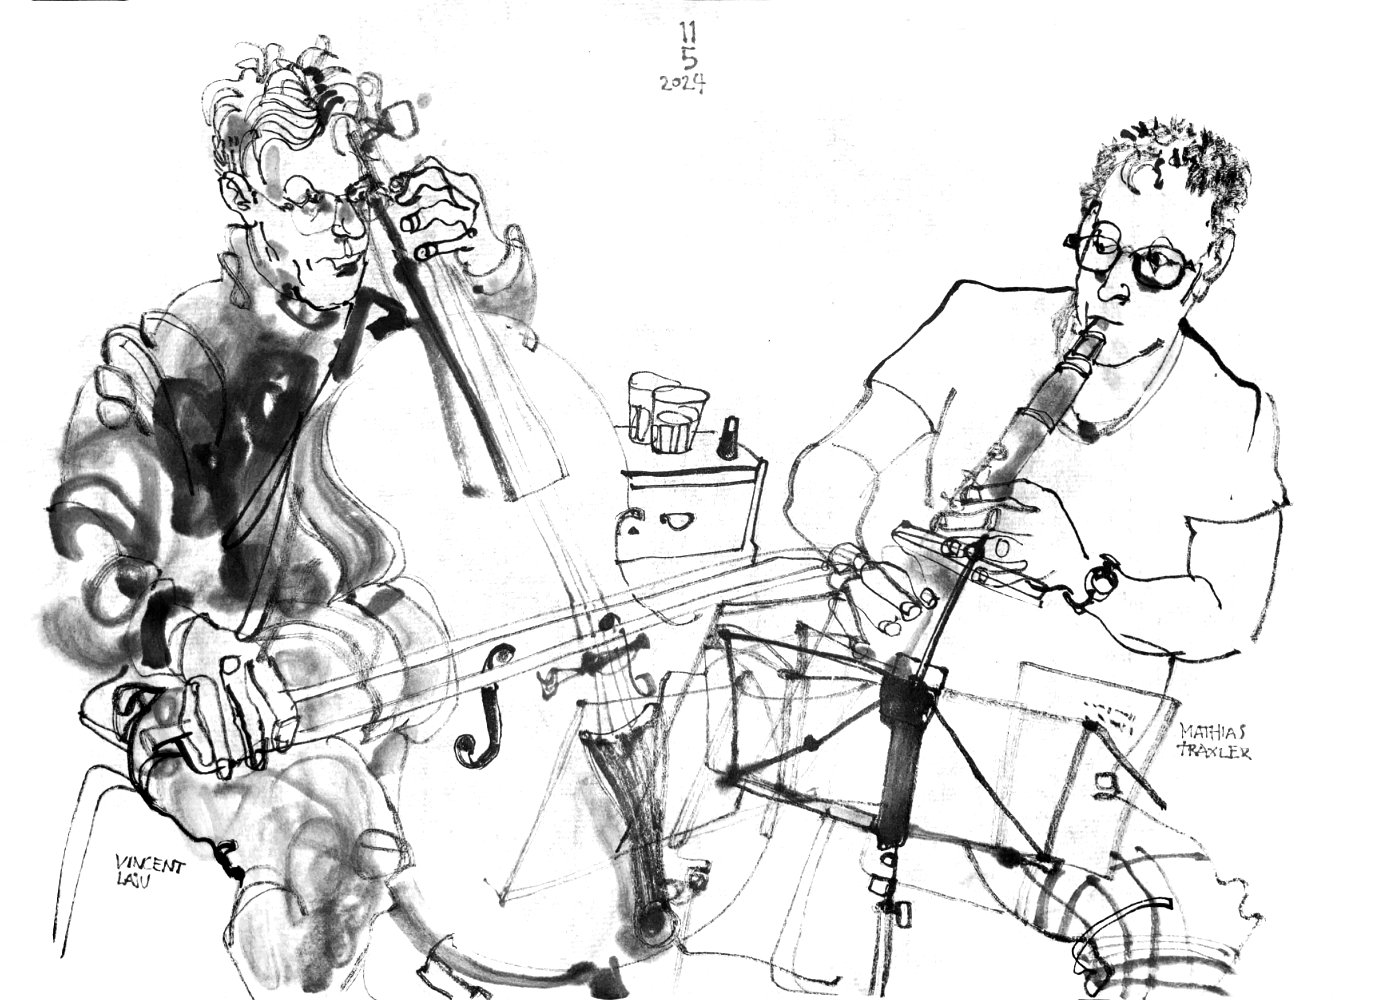 Ink drawing of two mal musicians, playing cello and clarinet.